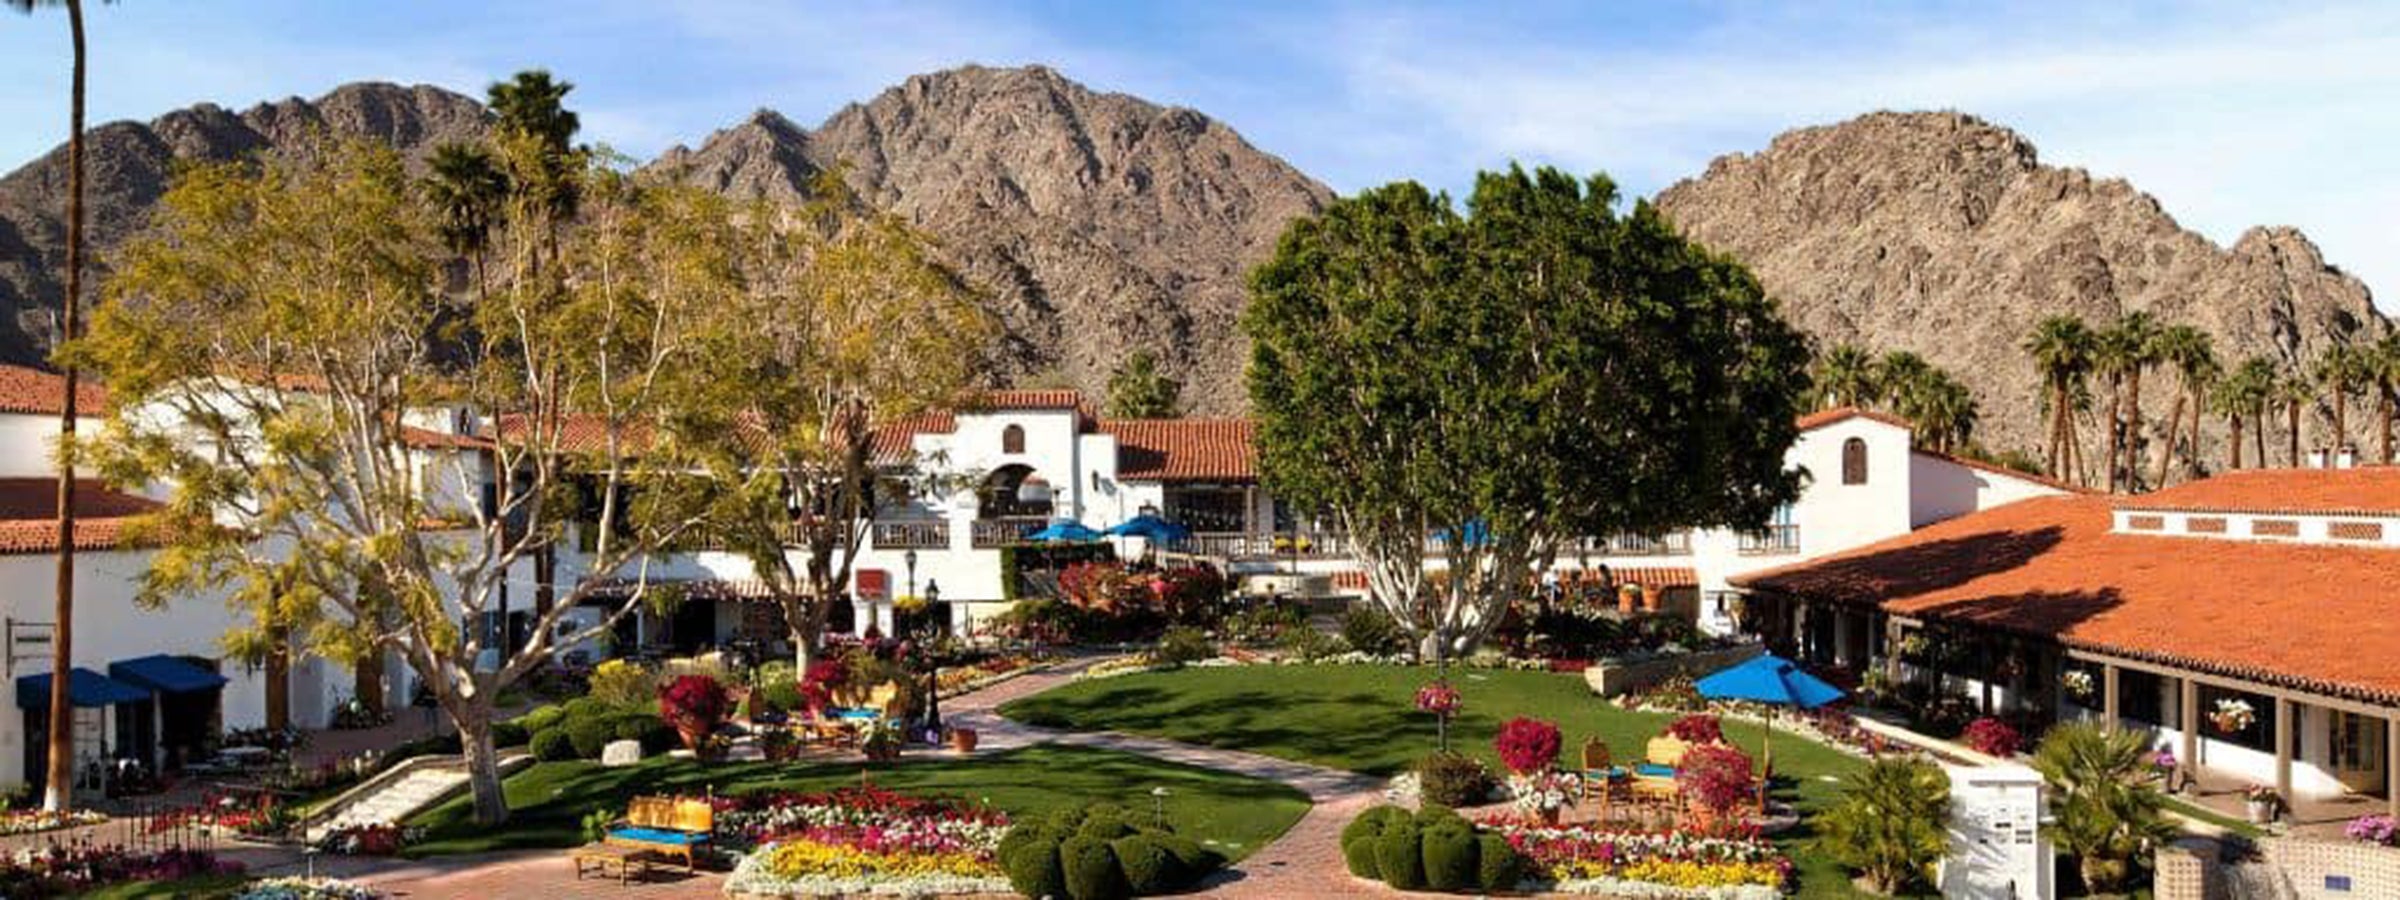 La Quinta tennis resort with mountains in background